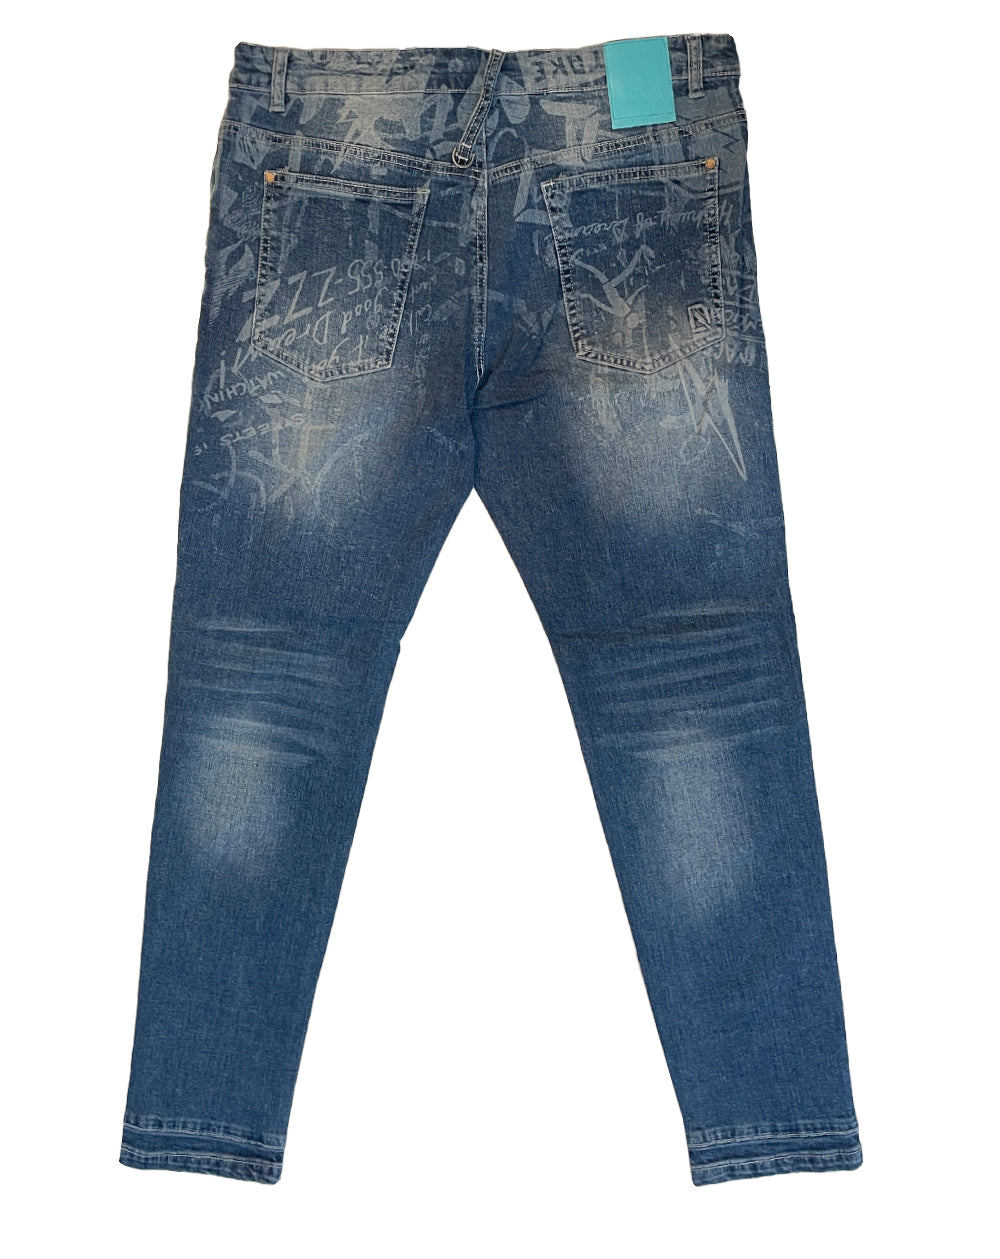 Purchase Wholesale baby denim jeans. Free Returns & Net 60 Terms on Faire